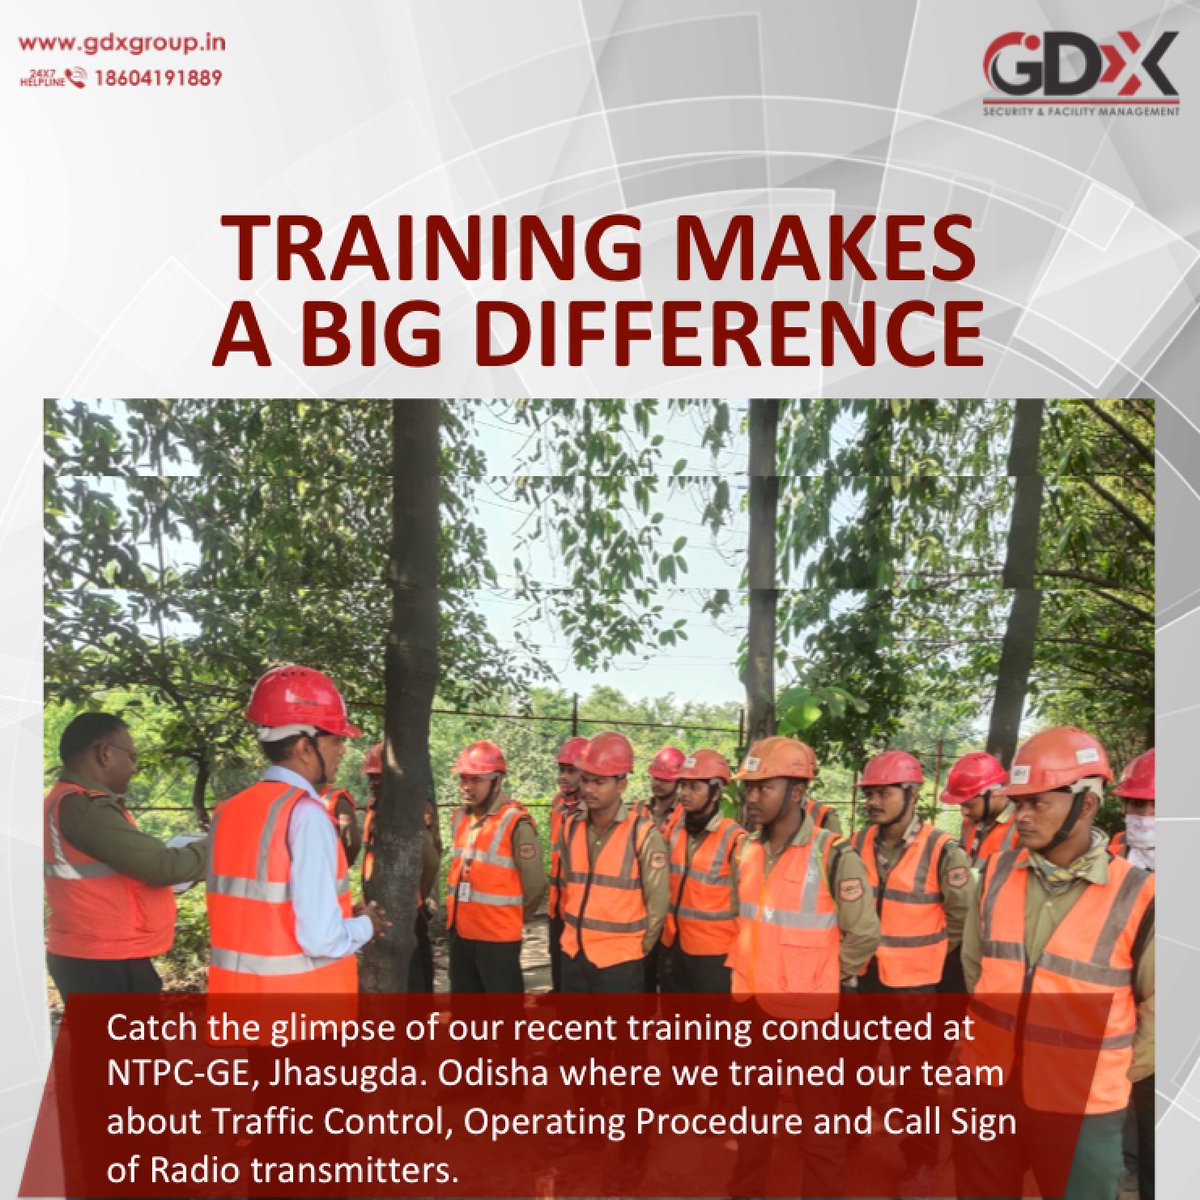 Training makes a big difference. Catch the glimpse of our recent training conducted at NTPC-GE, Jhasugda. Odisha.
#GDXGroup #GDXtech #GDXuniqueservices #GDX37YearsofServiceExcellence #SecurityServices #GDXtraining